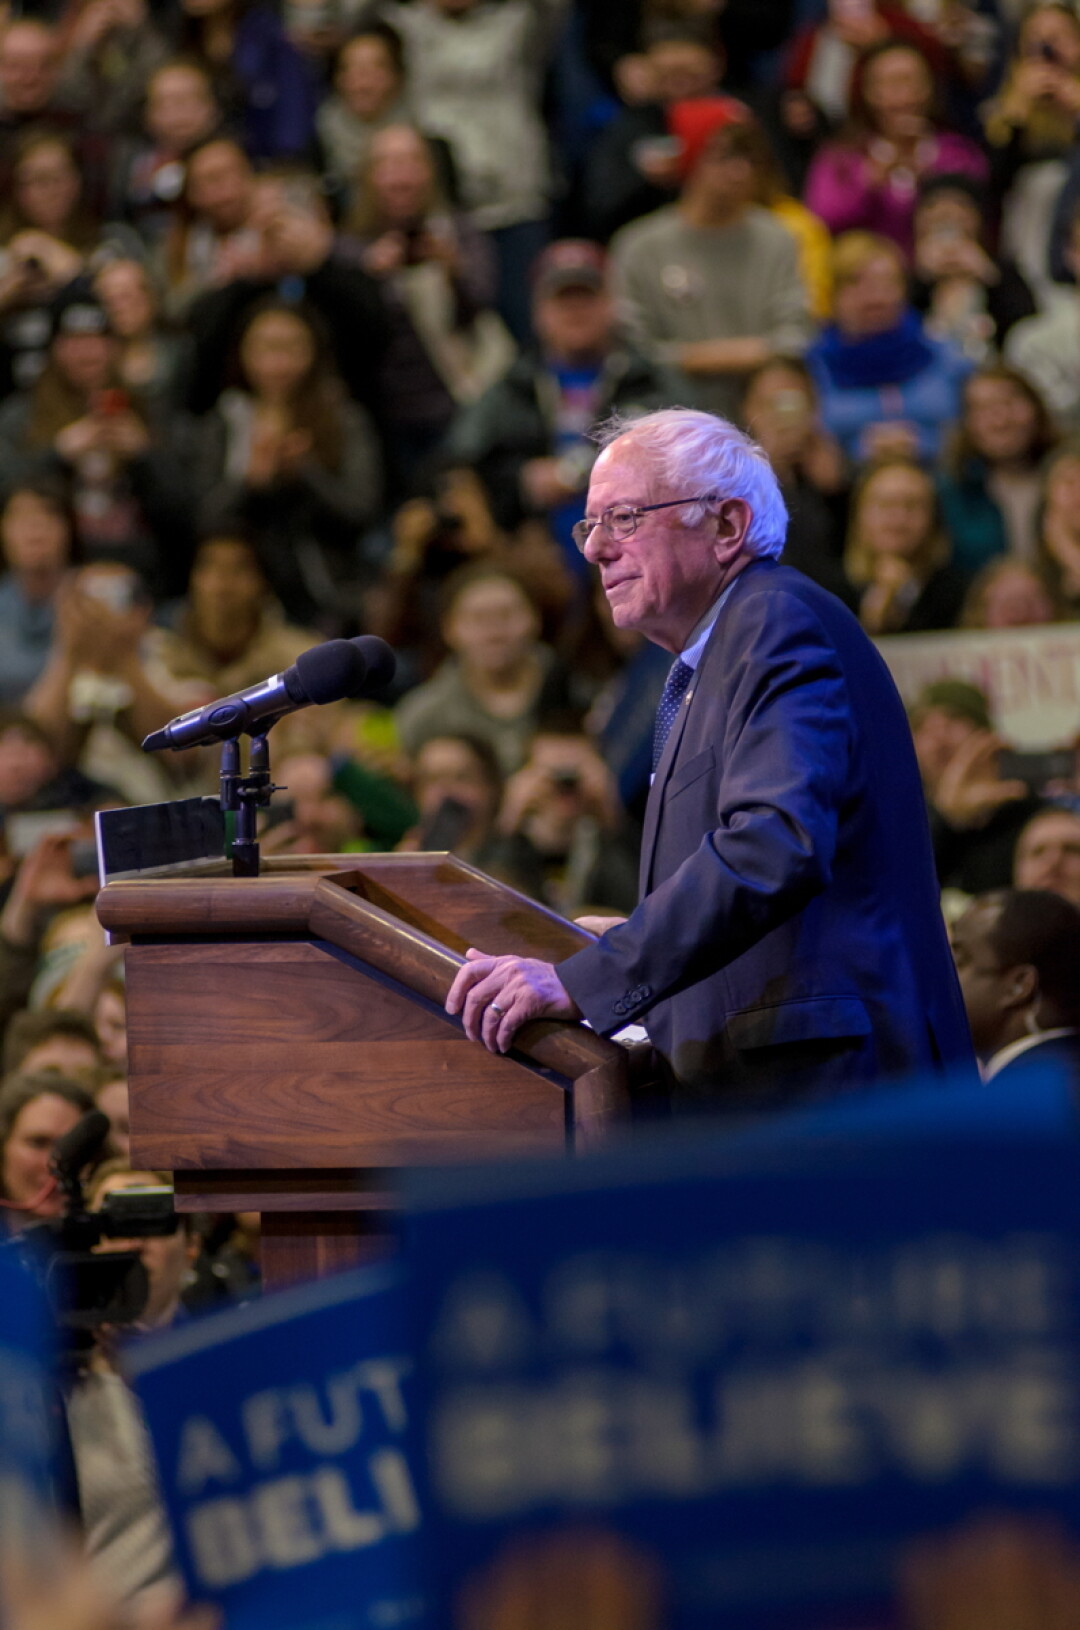 On April 2 and 3, all four frontrunners for the 2016 presidential primary race visited Eau Claire to rally support ahead of state elections on April 5. Bernie Sanders, Hillary Clinton, and Donald Trump spoke on Saturday, with Ted Cruz on Sunday. Above: Sanders at UWEC’s Zorn Arena with more than 3,400 in attendance. 